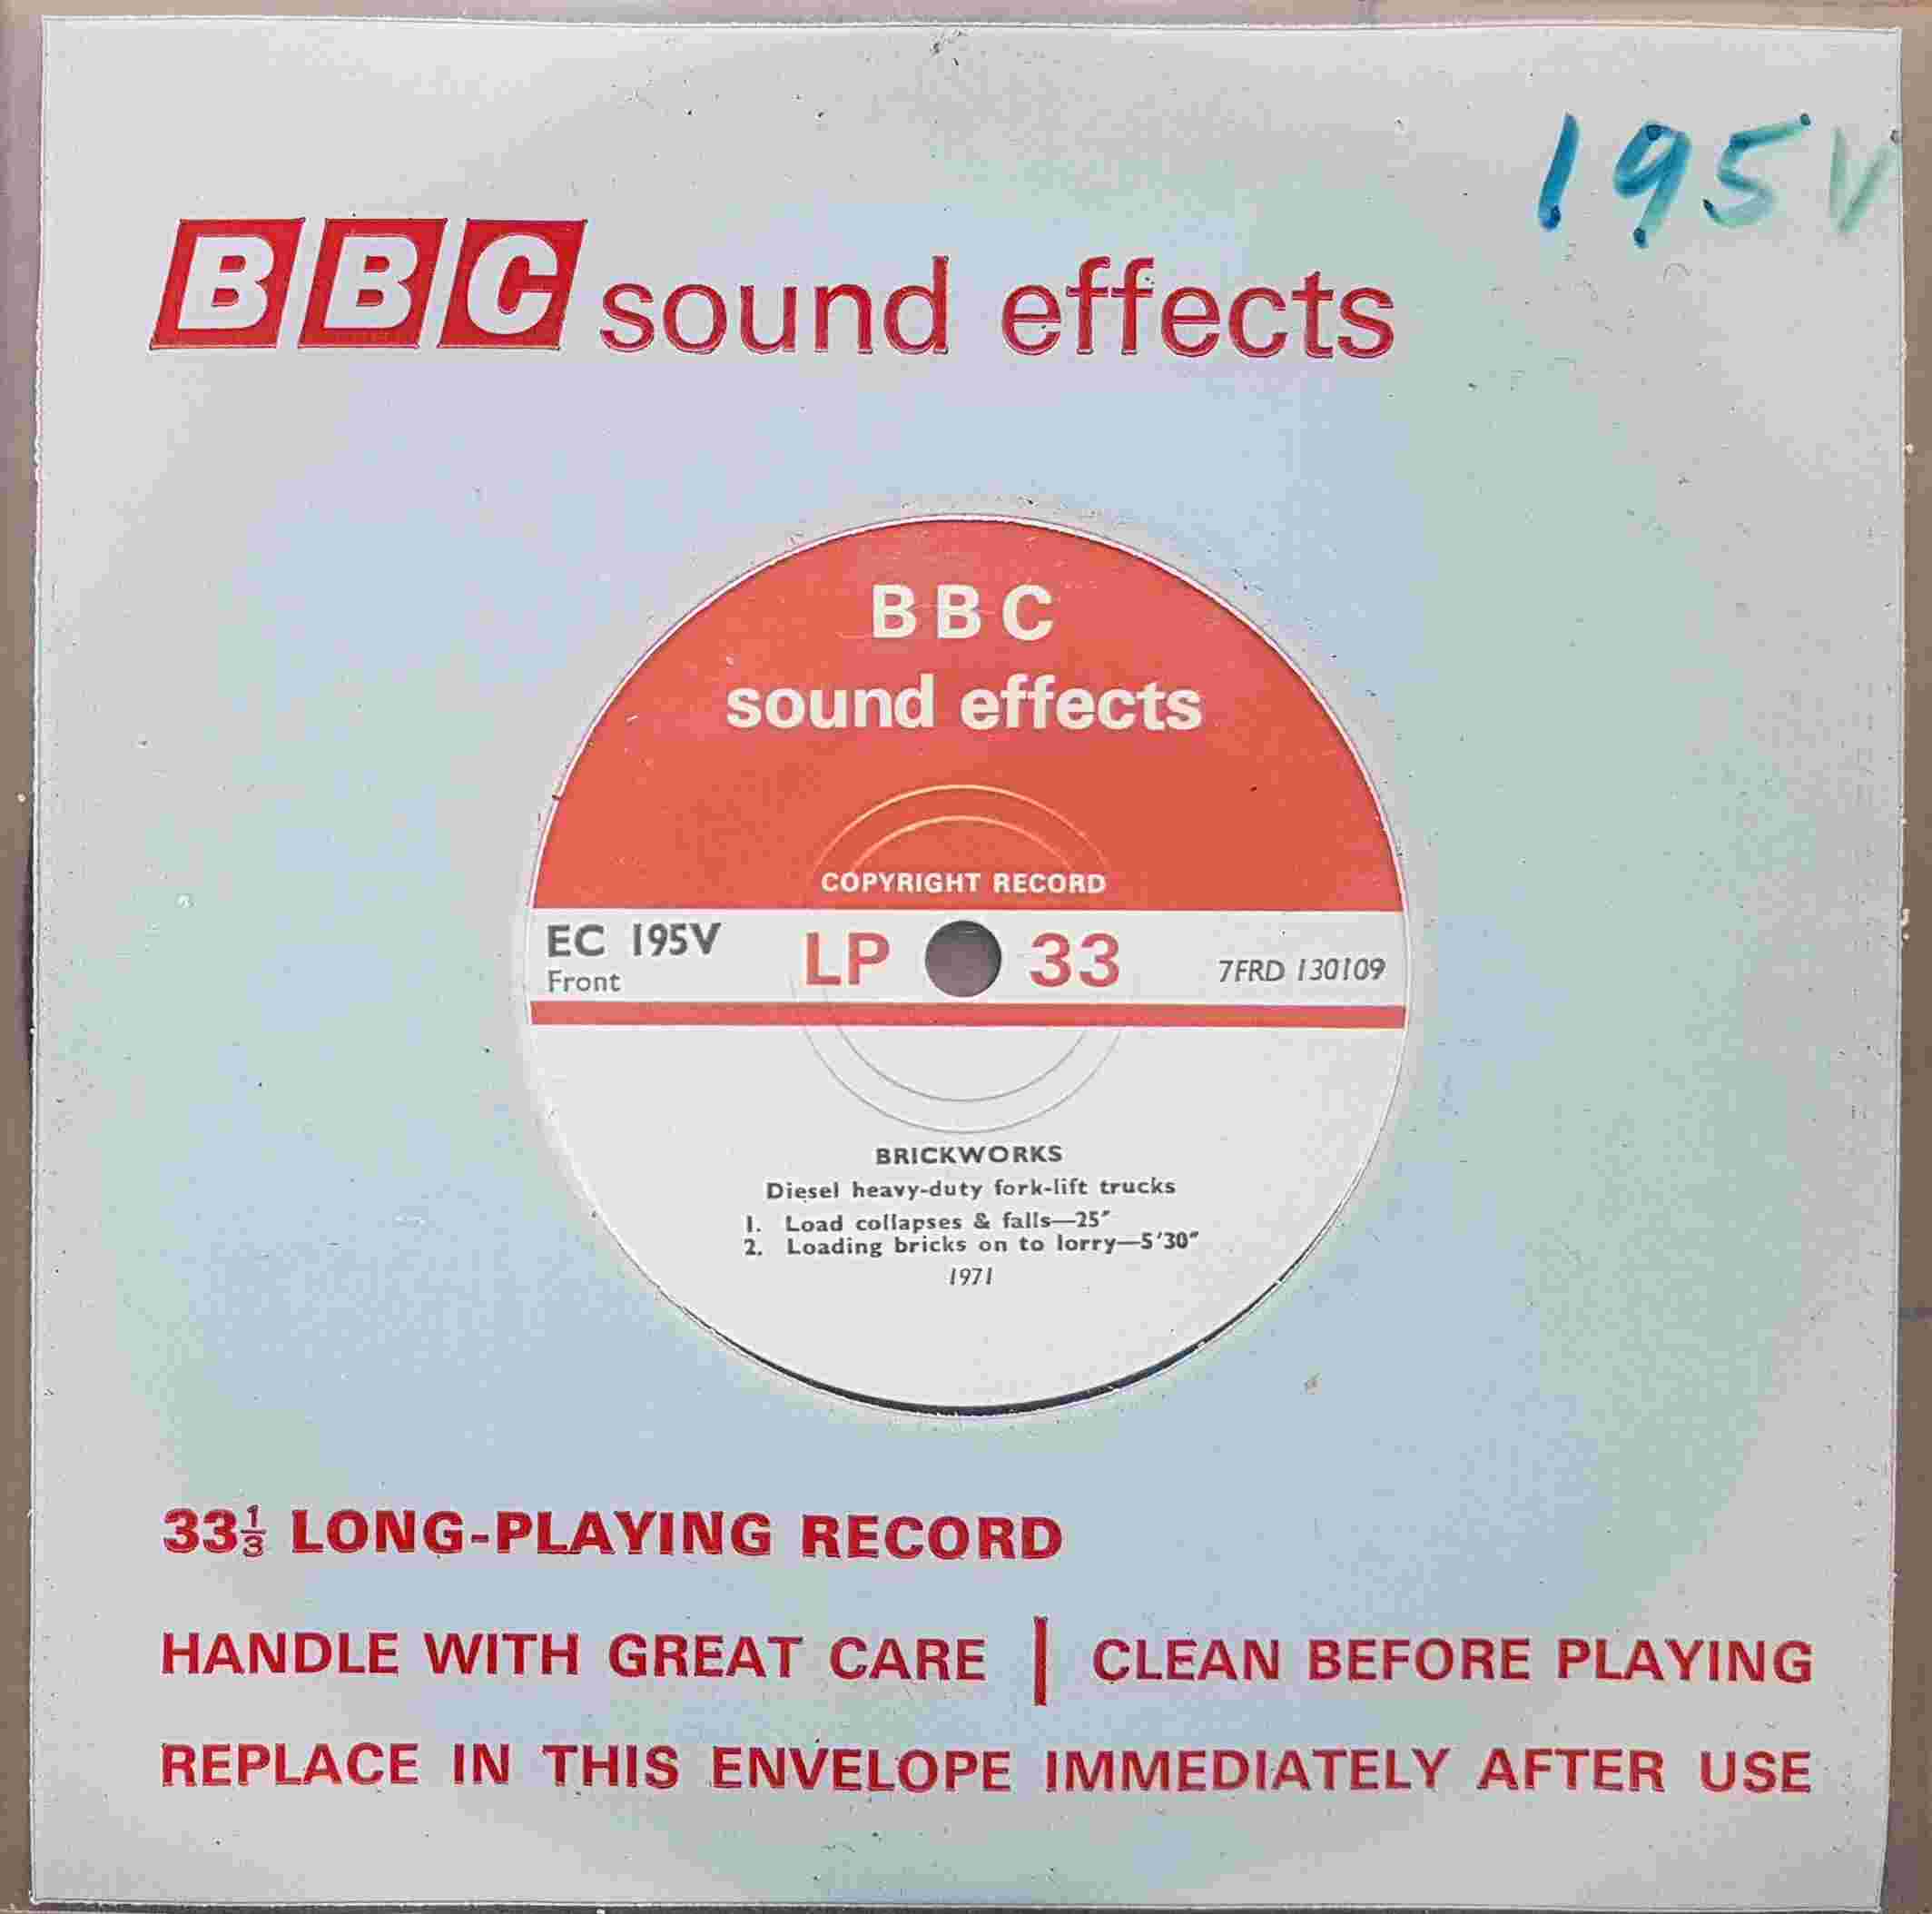 Picture of EC 195V Brickworks by artist Not registered from the BBC singles - Records and Tapes library